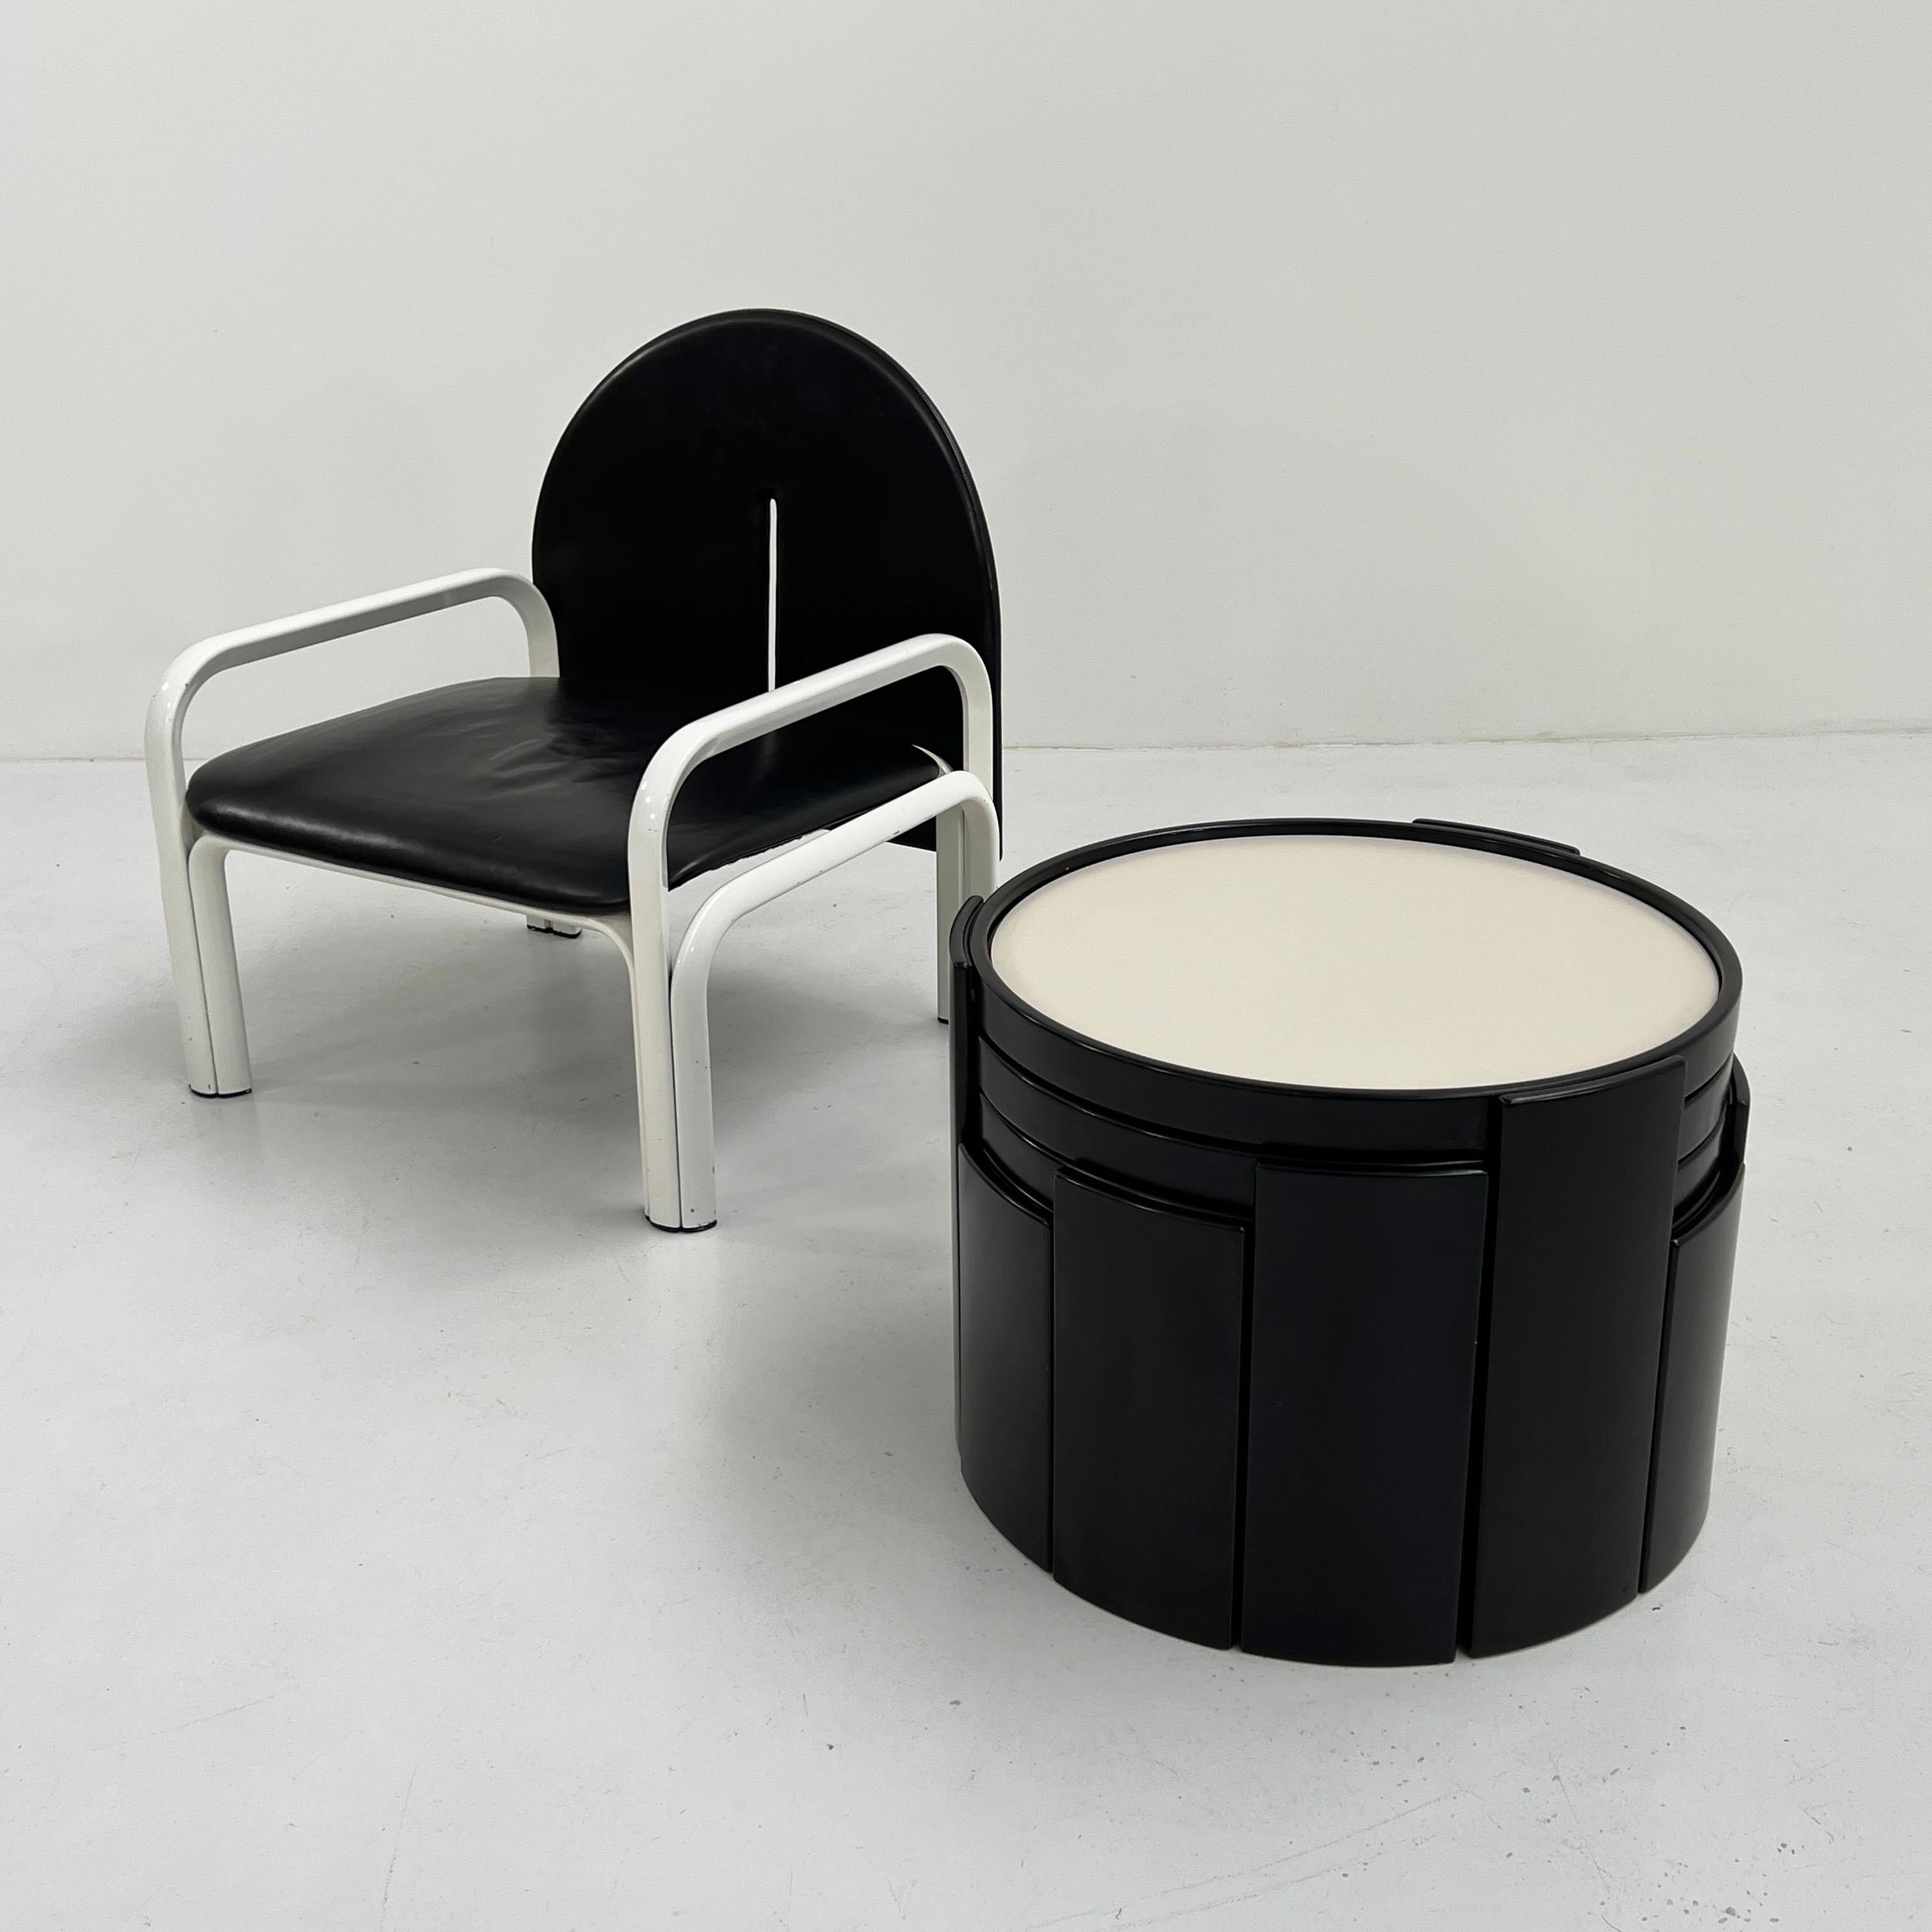 Set of Large Reversible Nesting Tables by Gianfranco Frattini for Cassina, 1960s For Sale 1